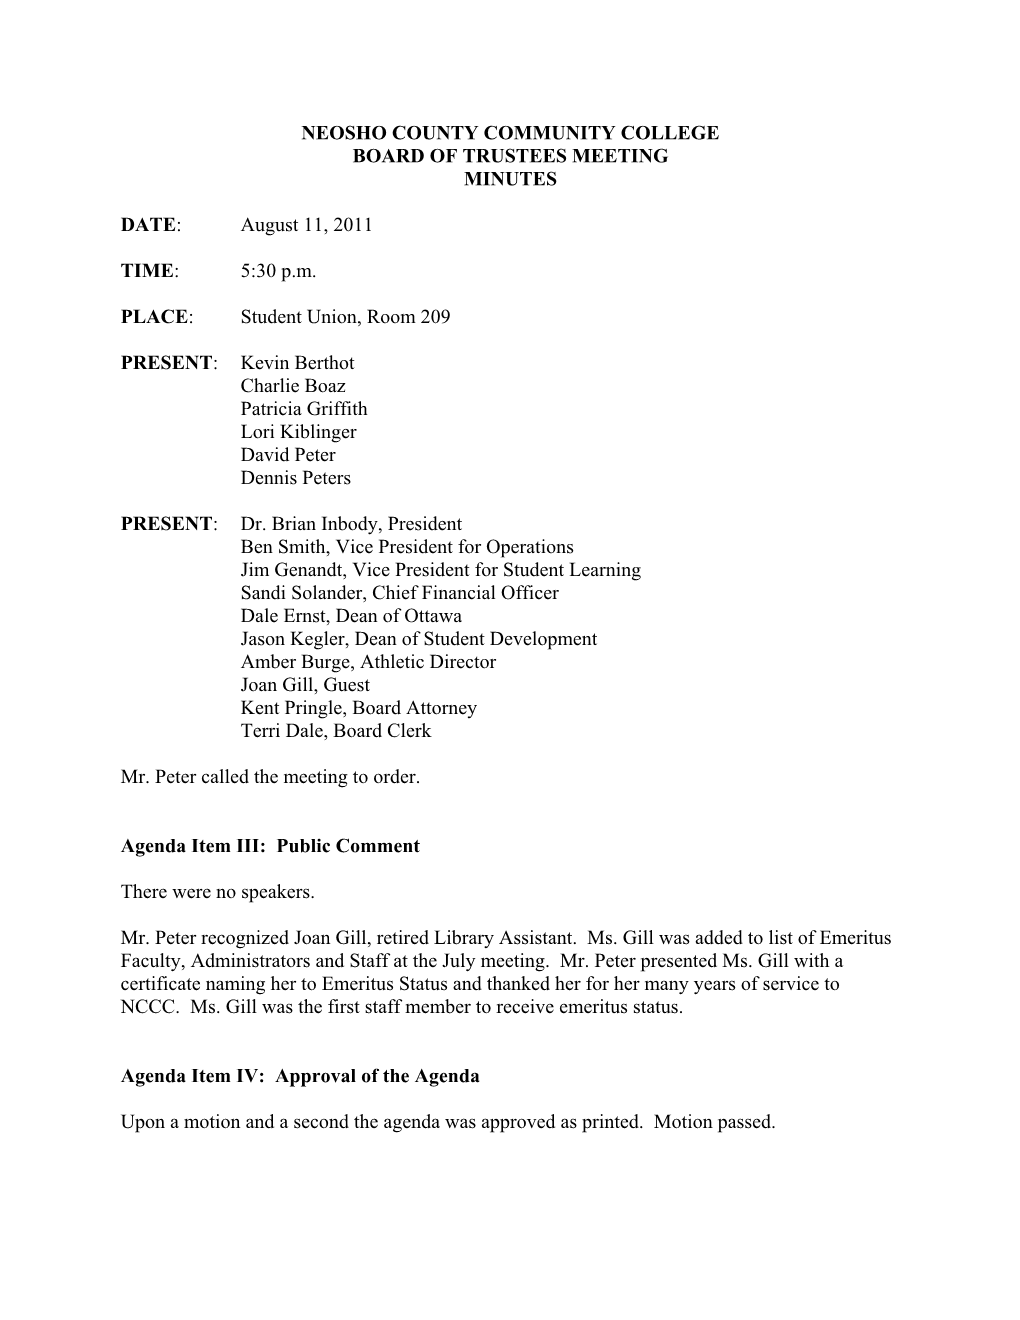 NEOSHO COUNTY COMMUNITY COLLEGE BOARD of TRUSTEES MEETING MINUTES DATE: August 11, 2011 TIME: 5:30 P.M. PLACE: Student Union